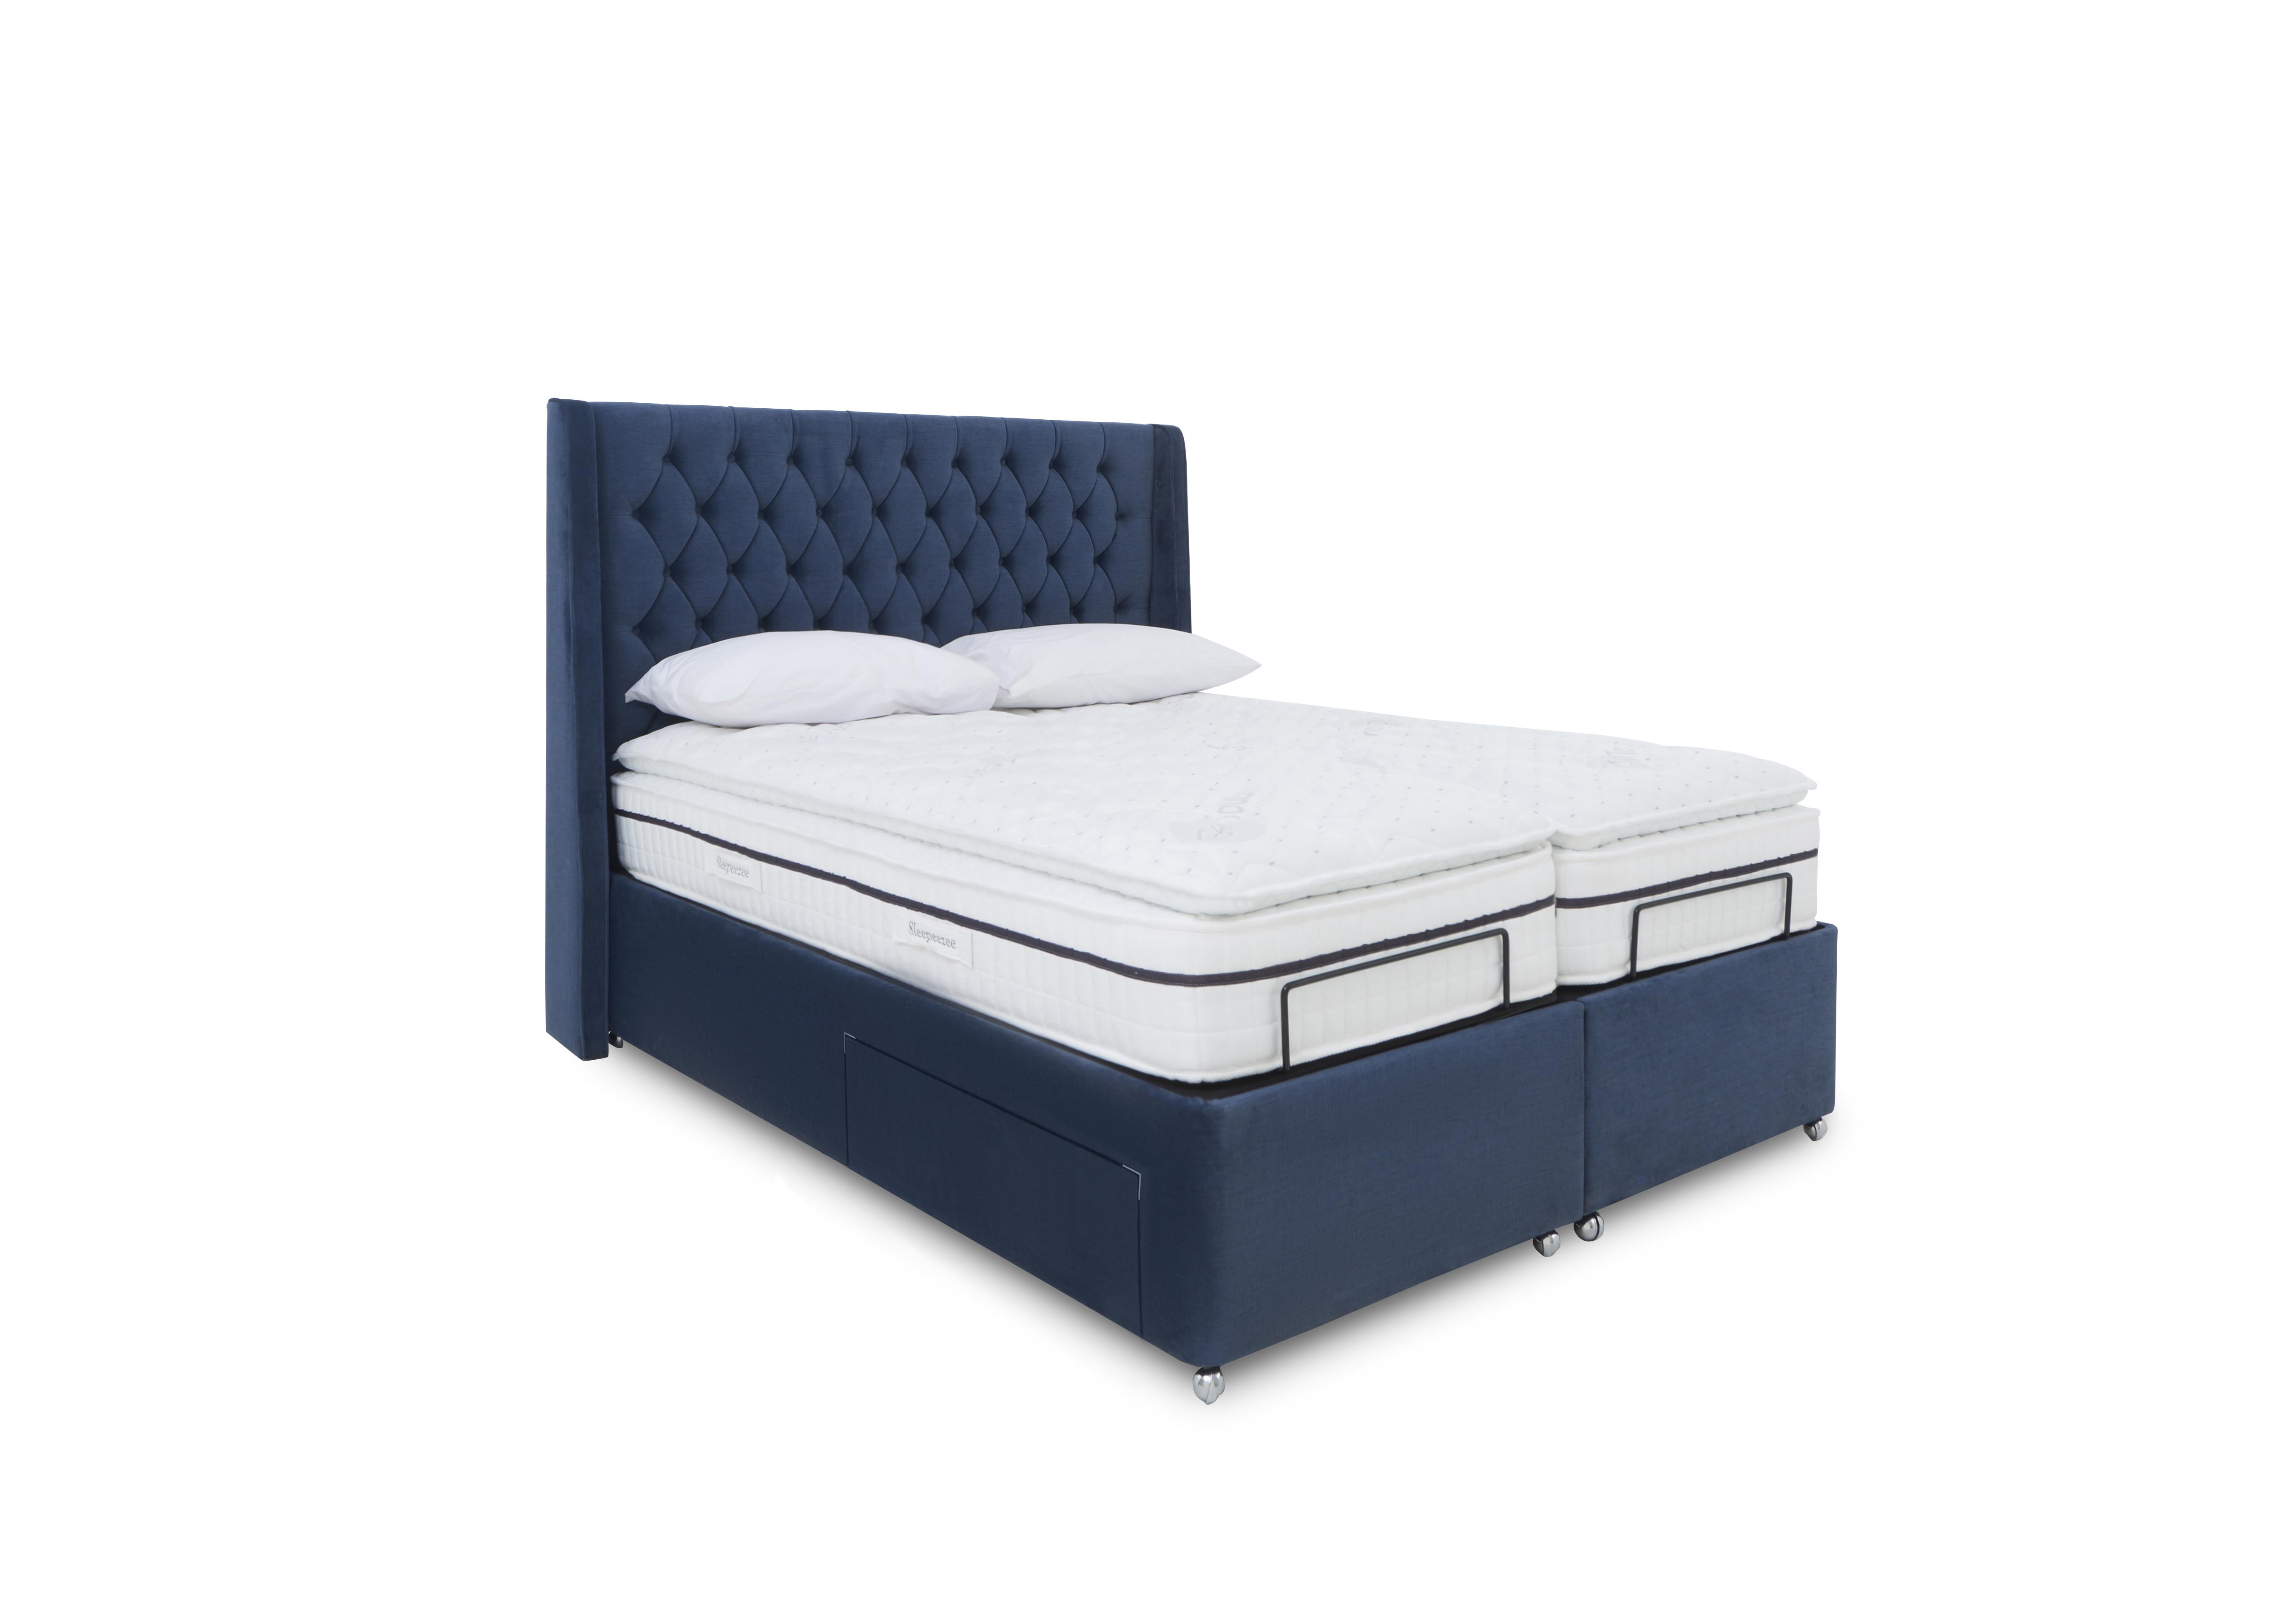 E-Motion Zen Dual Adjustable Divan Base with Massage Function and Headboard in 600 Granite Blue on Furniture Village